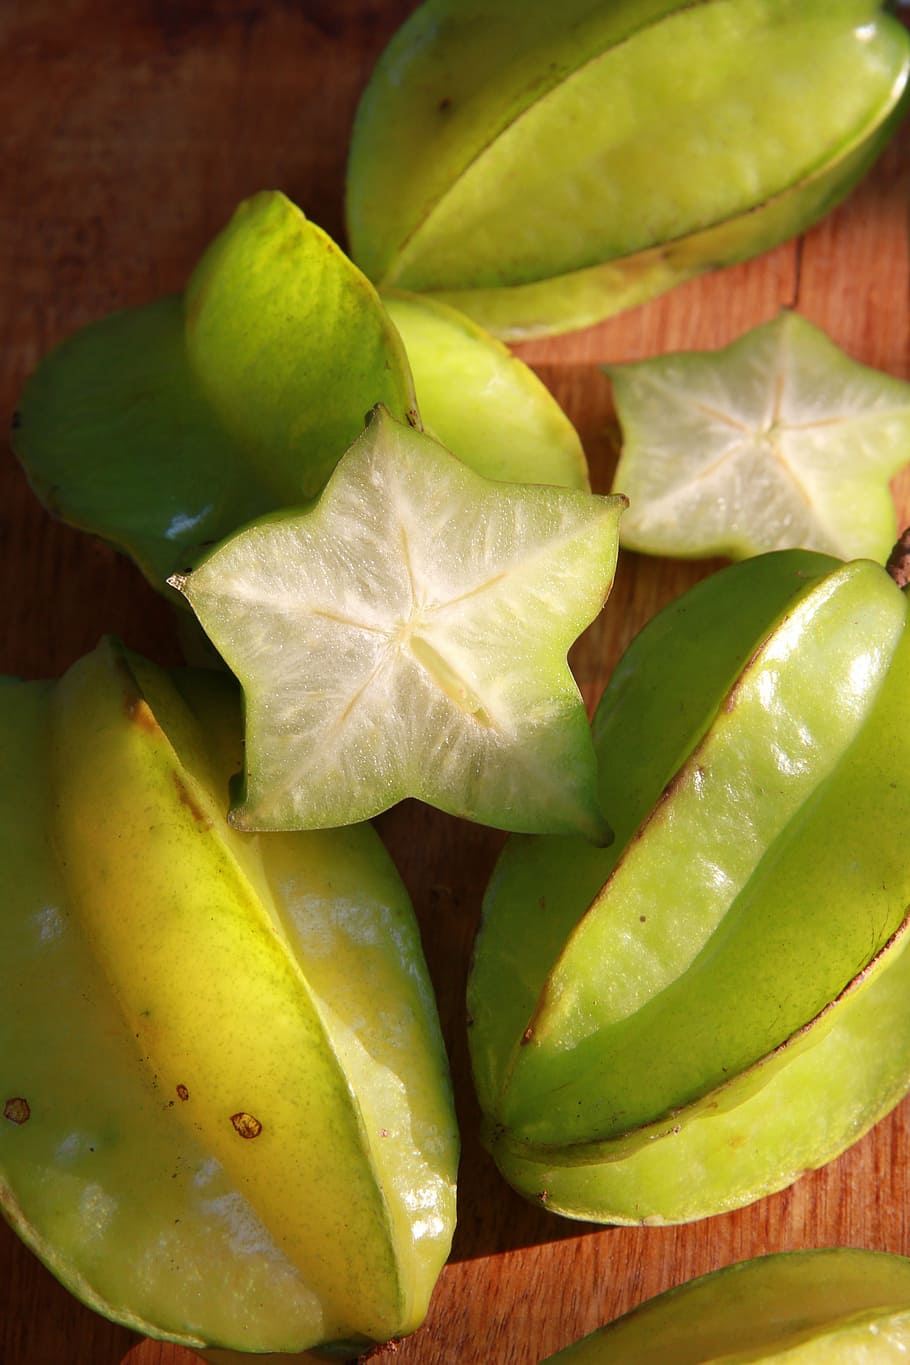 starfruit, green, ripe, fresh, natural, sour, food and drink